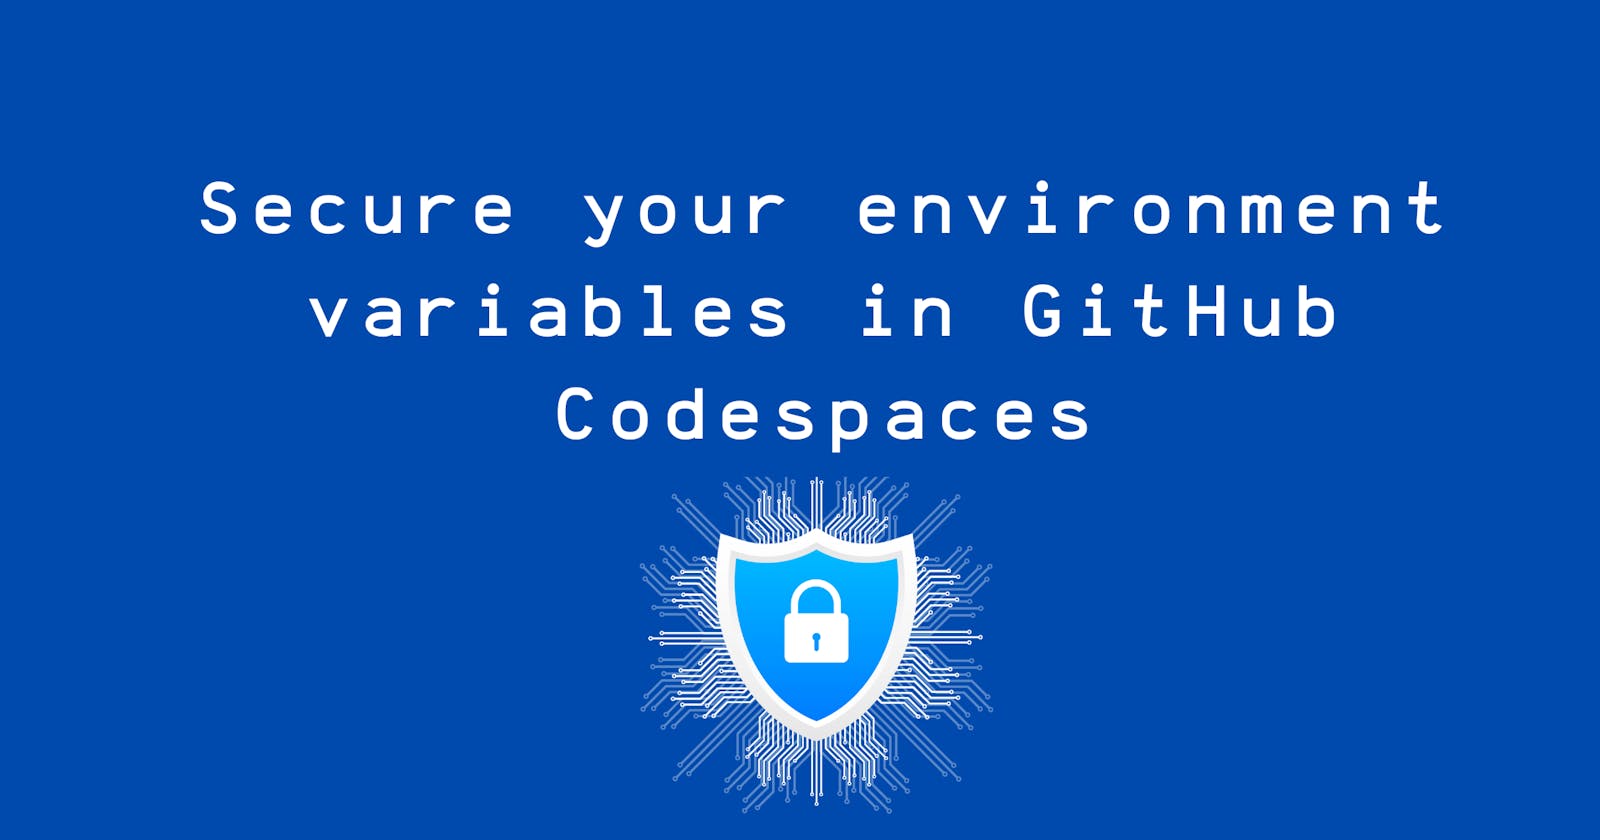 Securely store environment variables with GitHub Codespaces